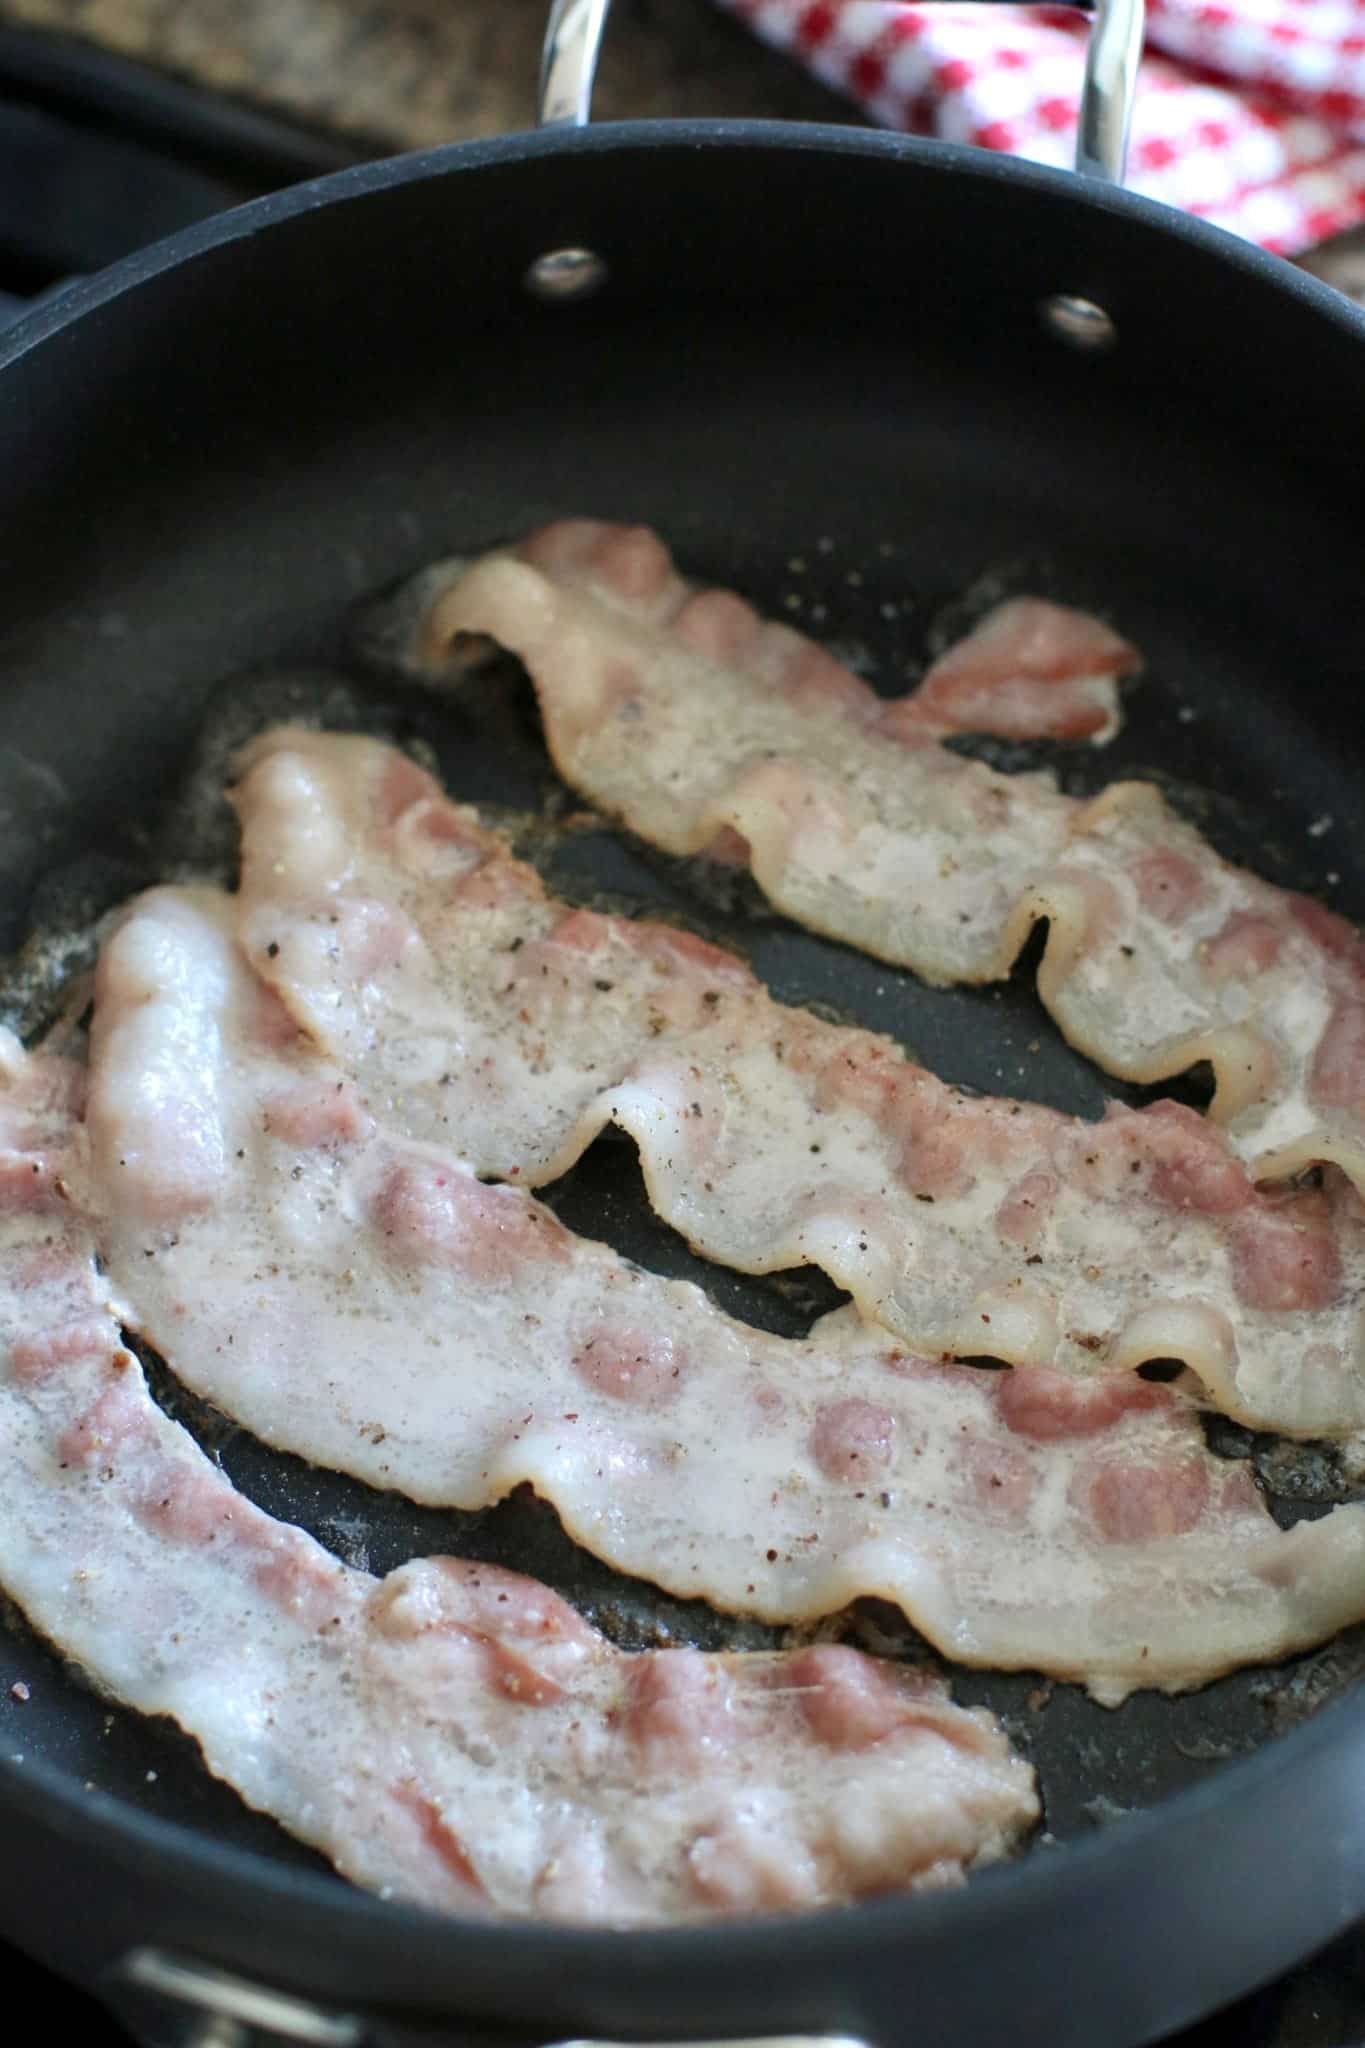 cooking bacon in a skillet.